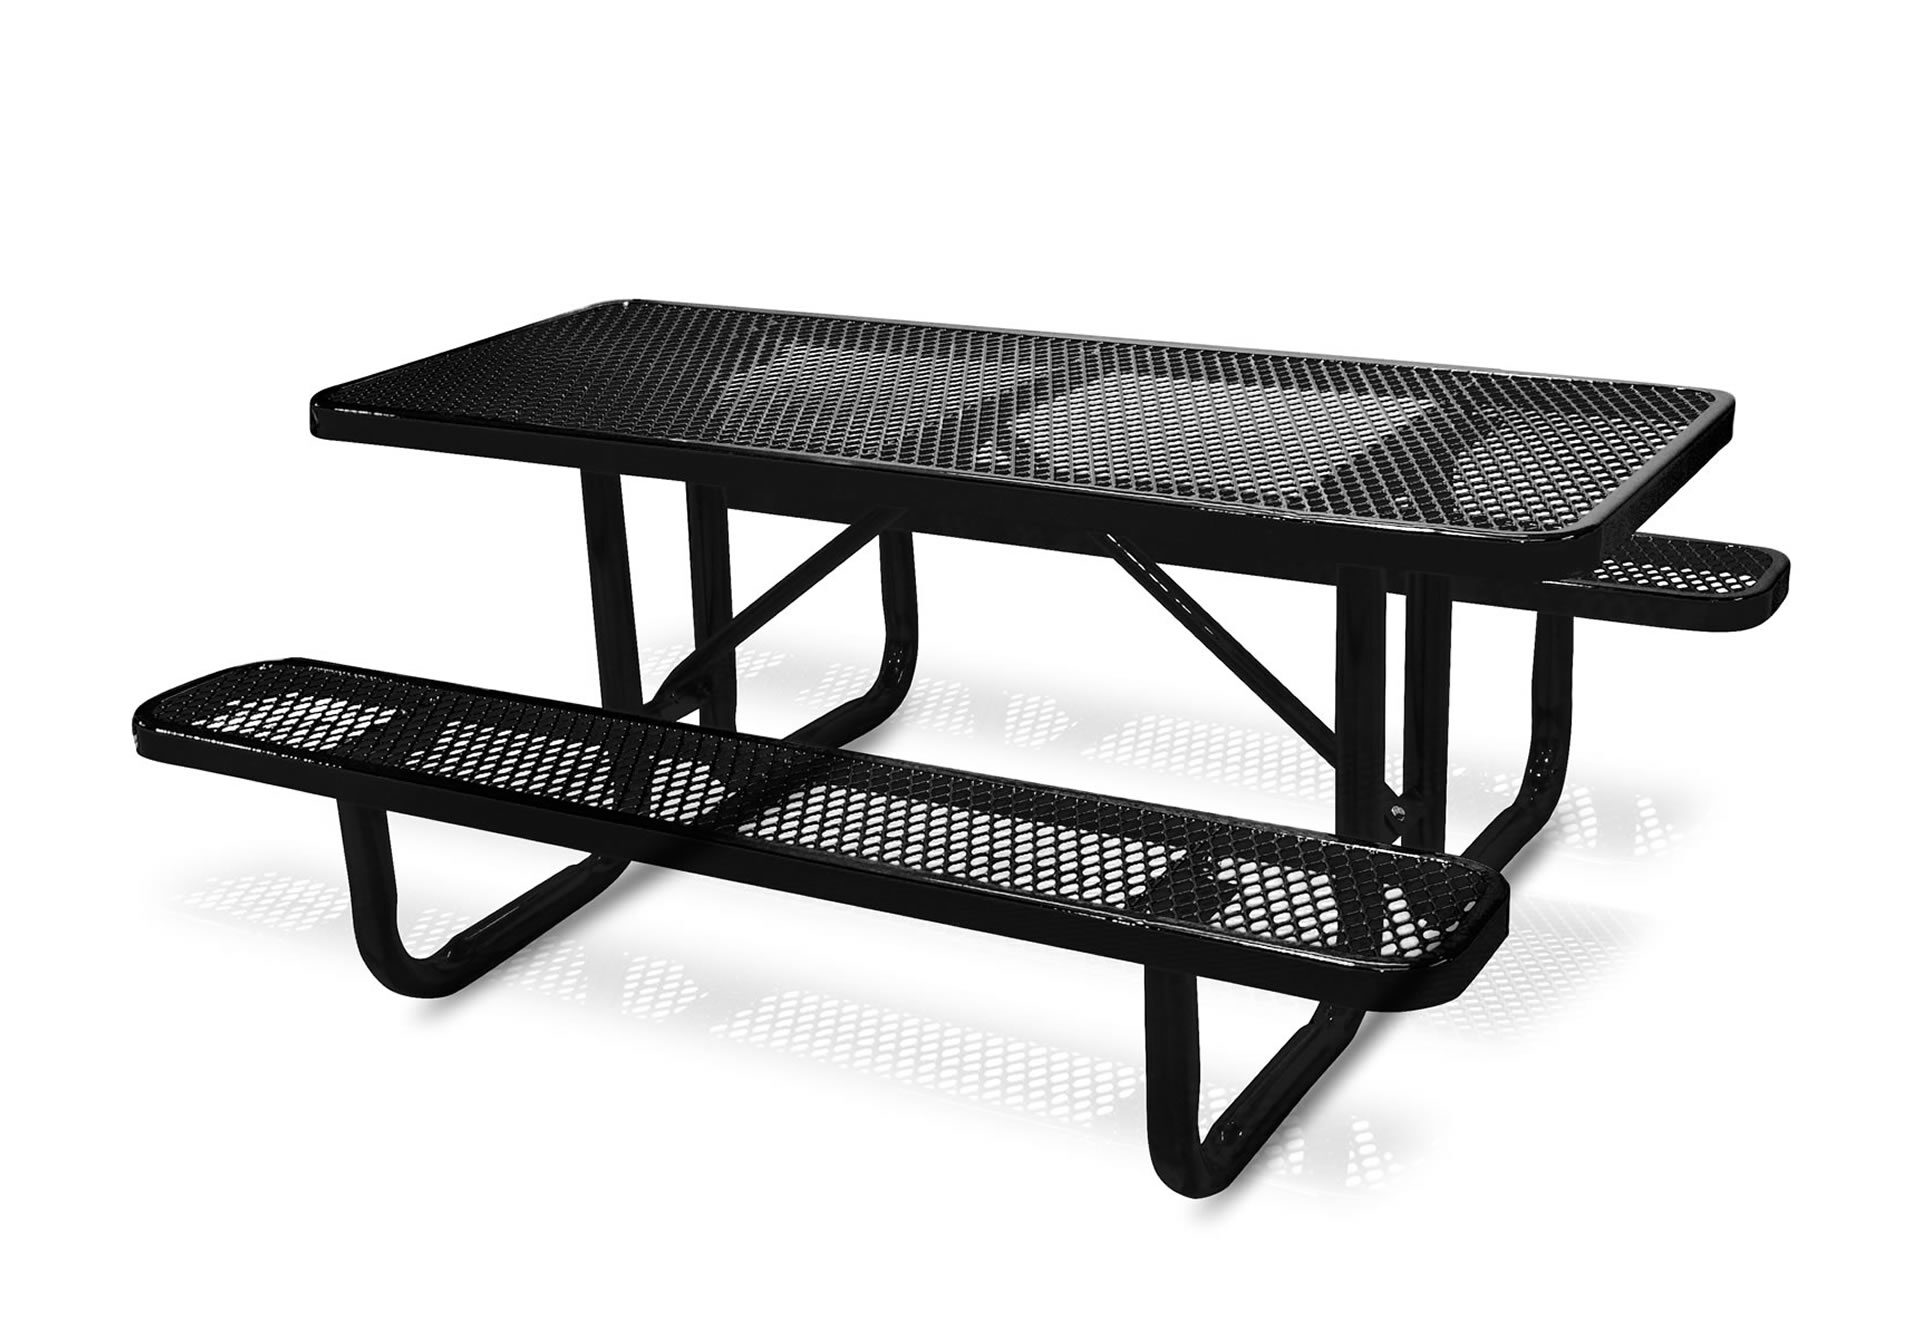 Getzen Picnic Table Outdoor table and benches